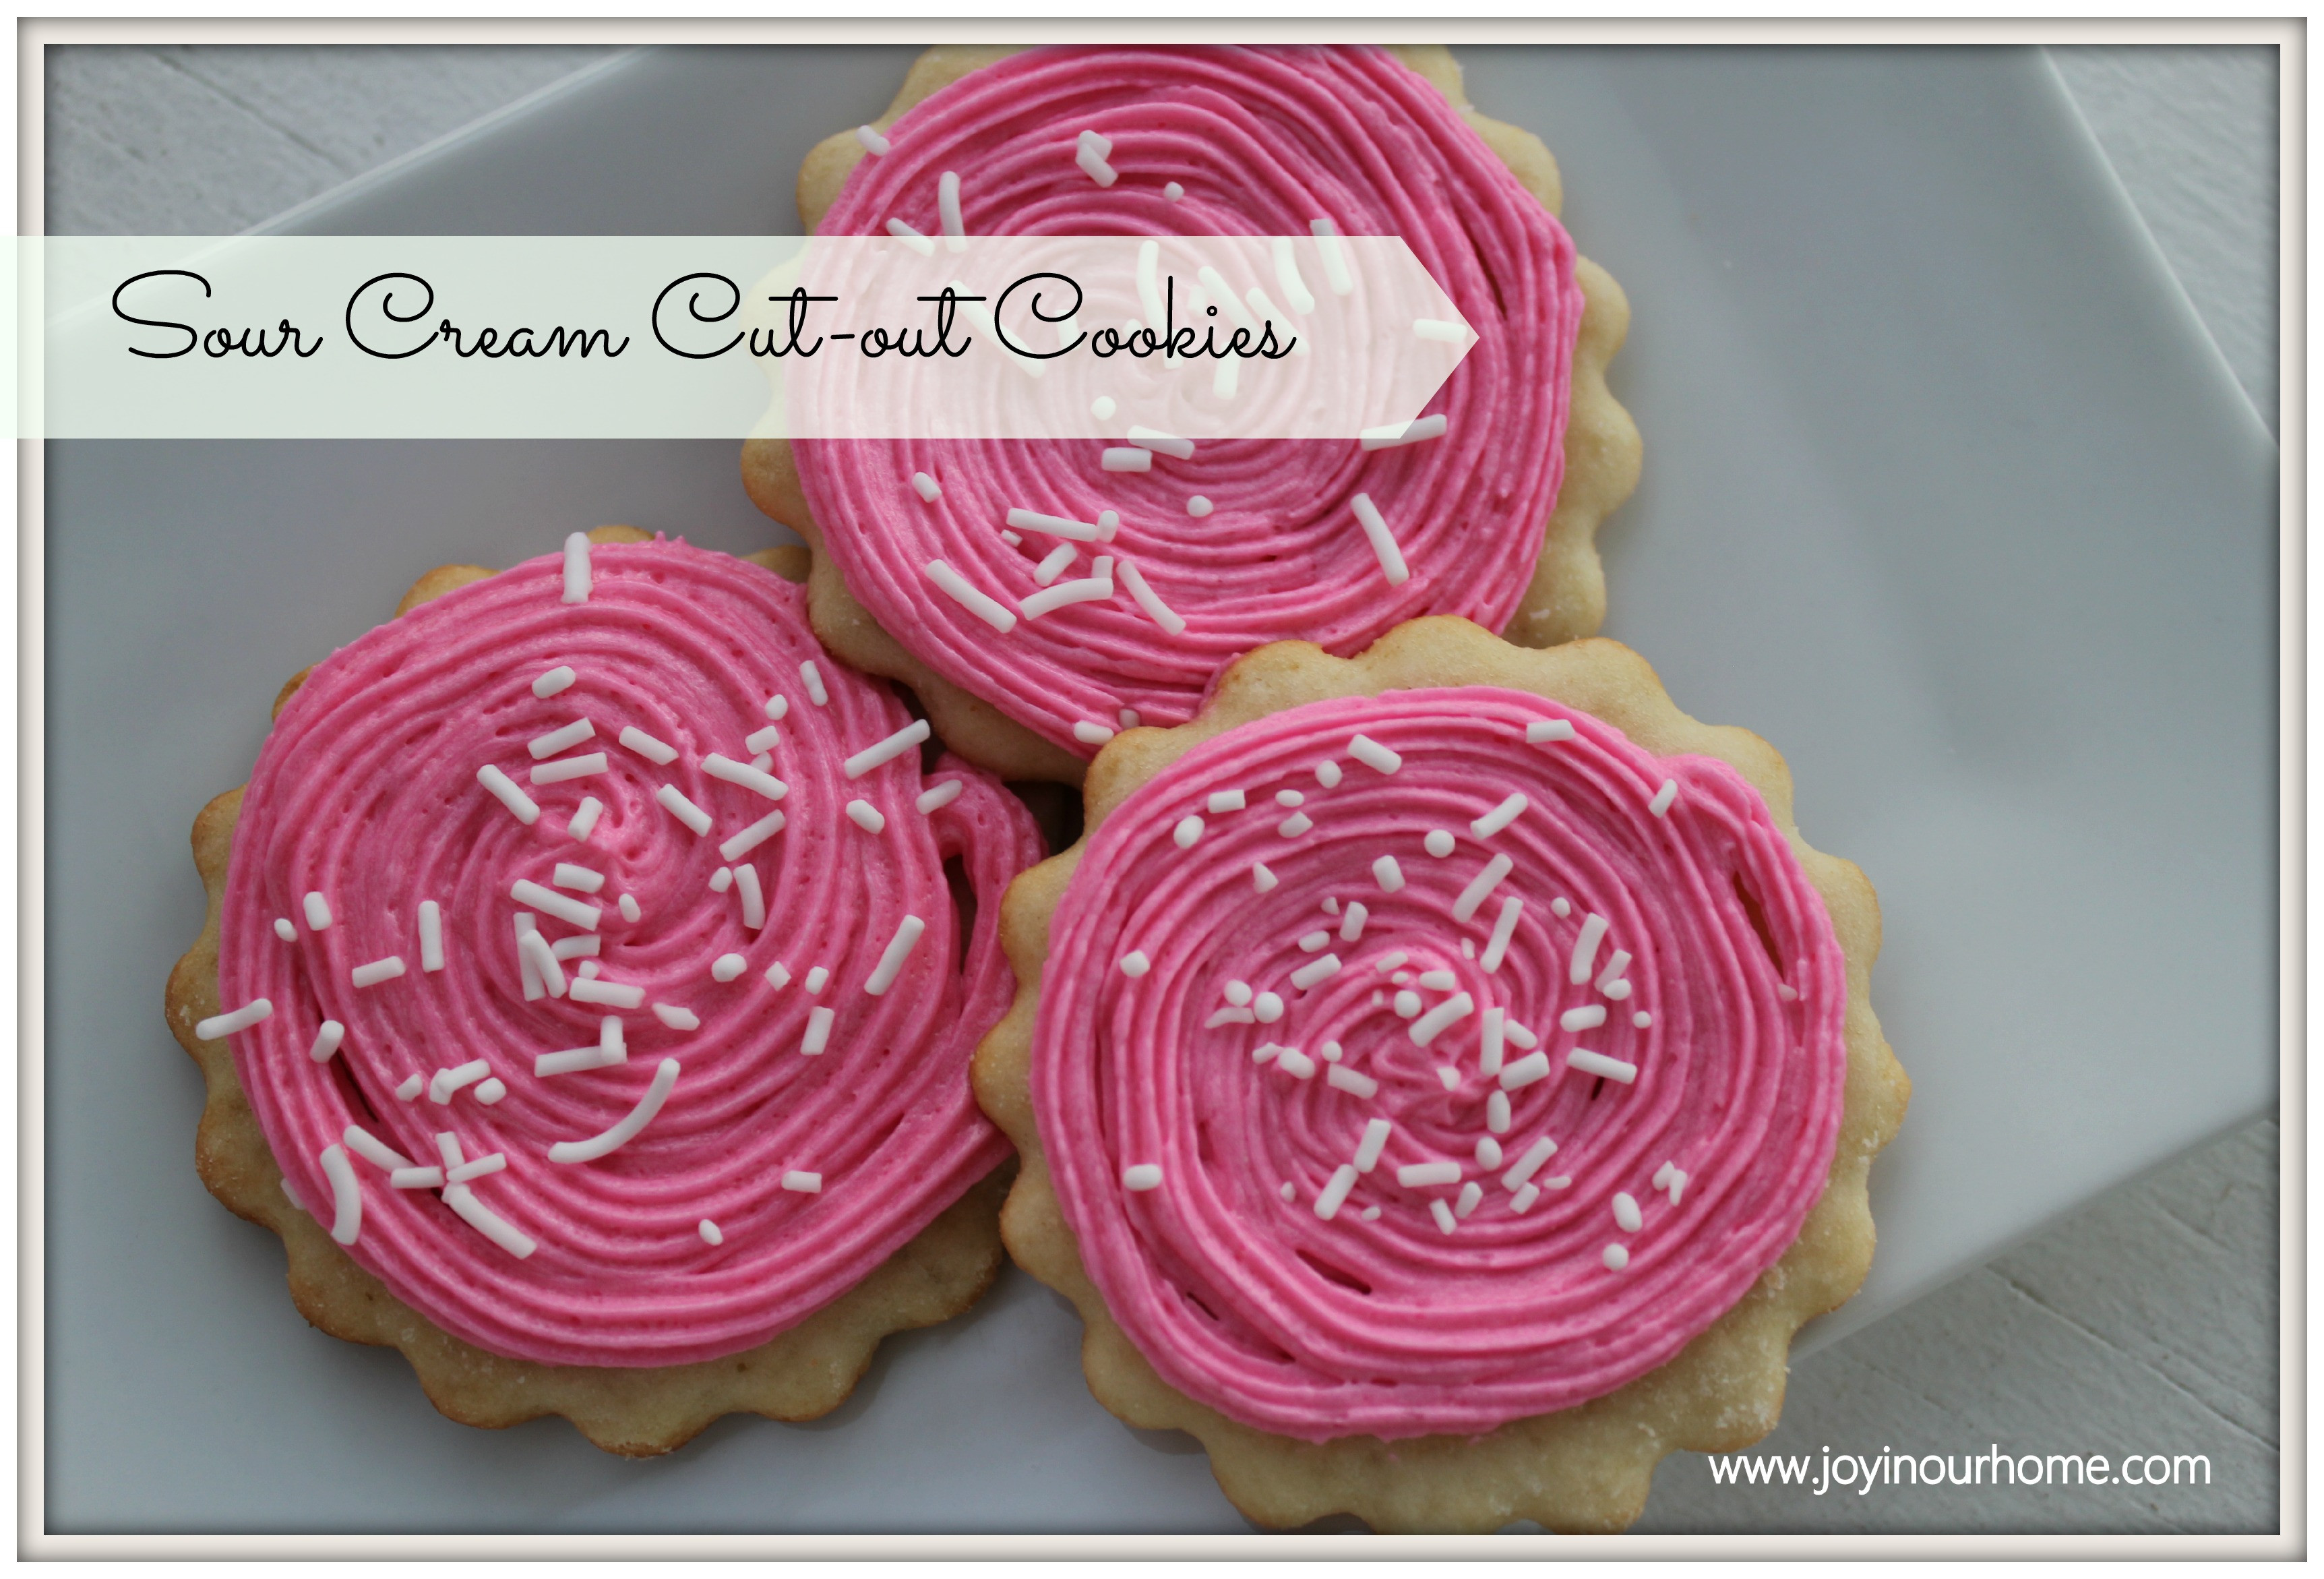 Sour Cream Cut Out Cookies
 Sour Cream Cut out Cookies